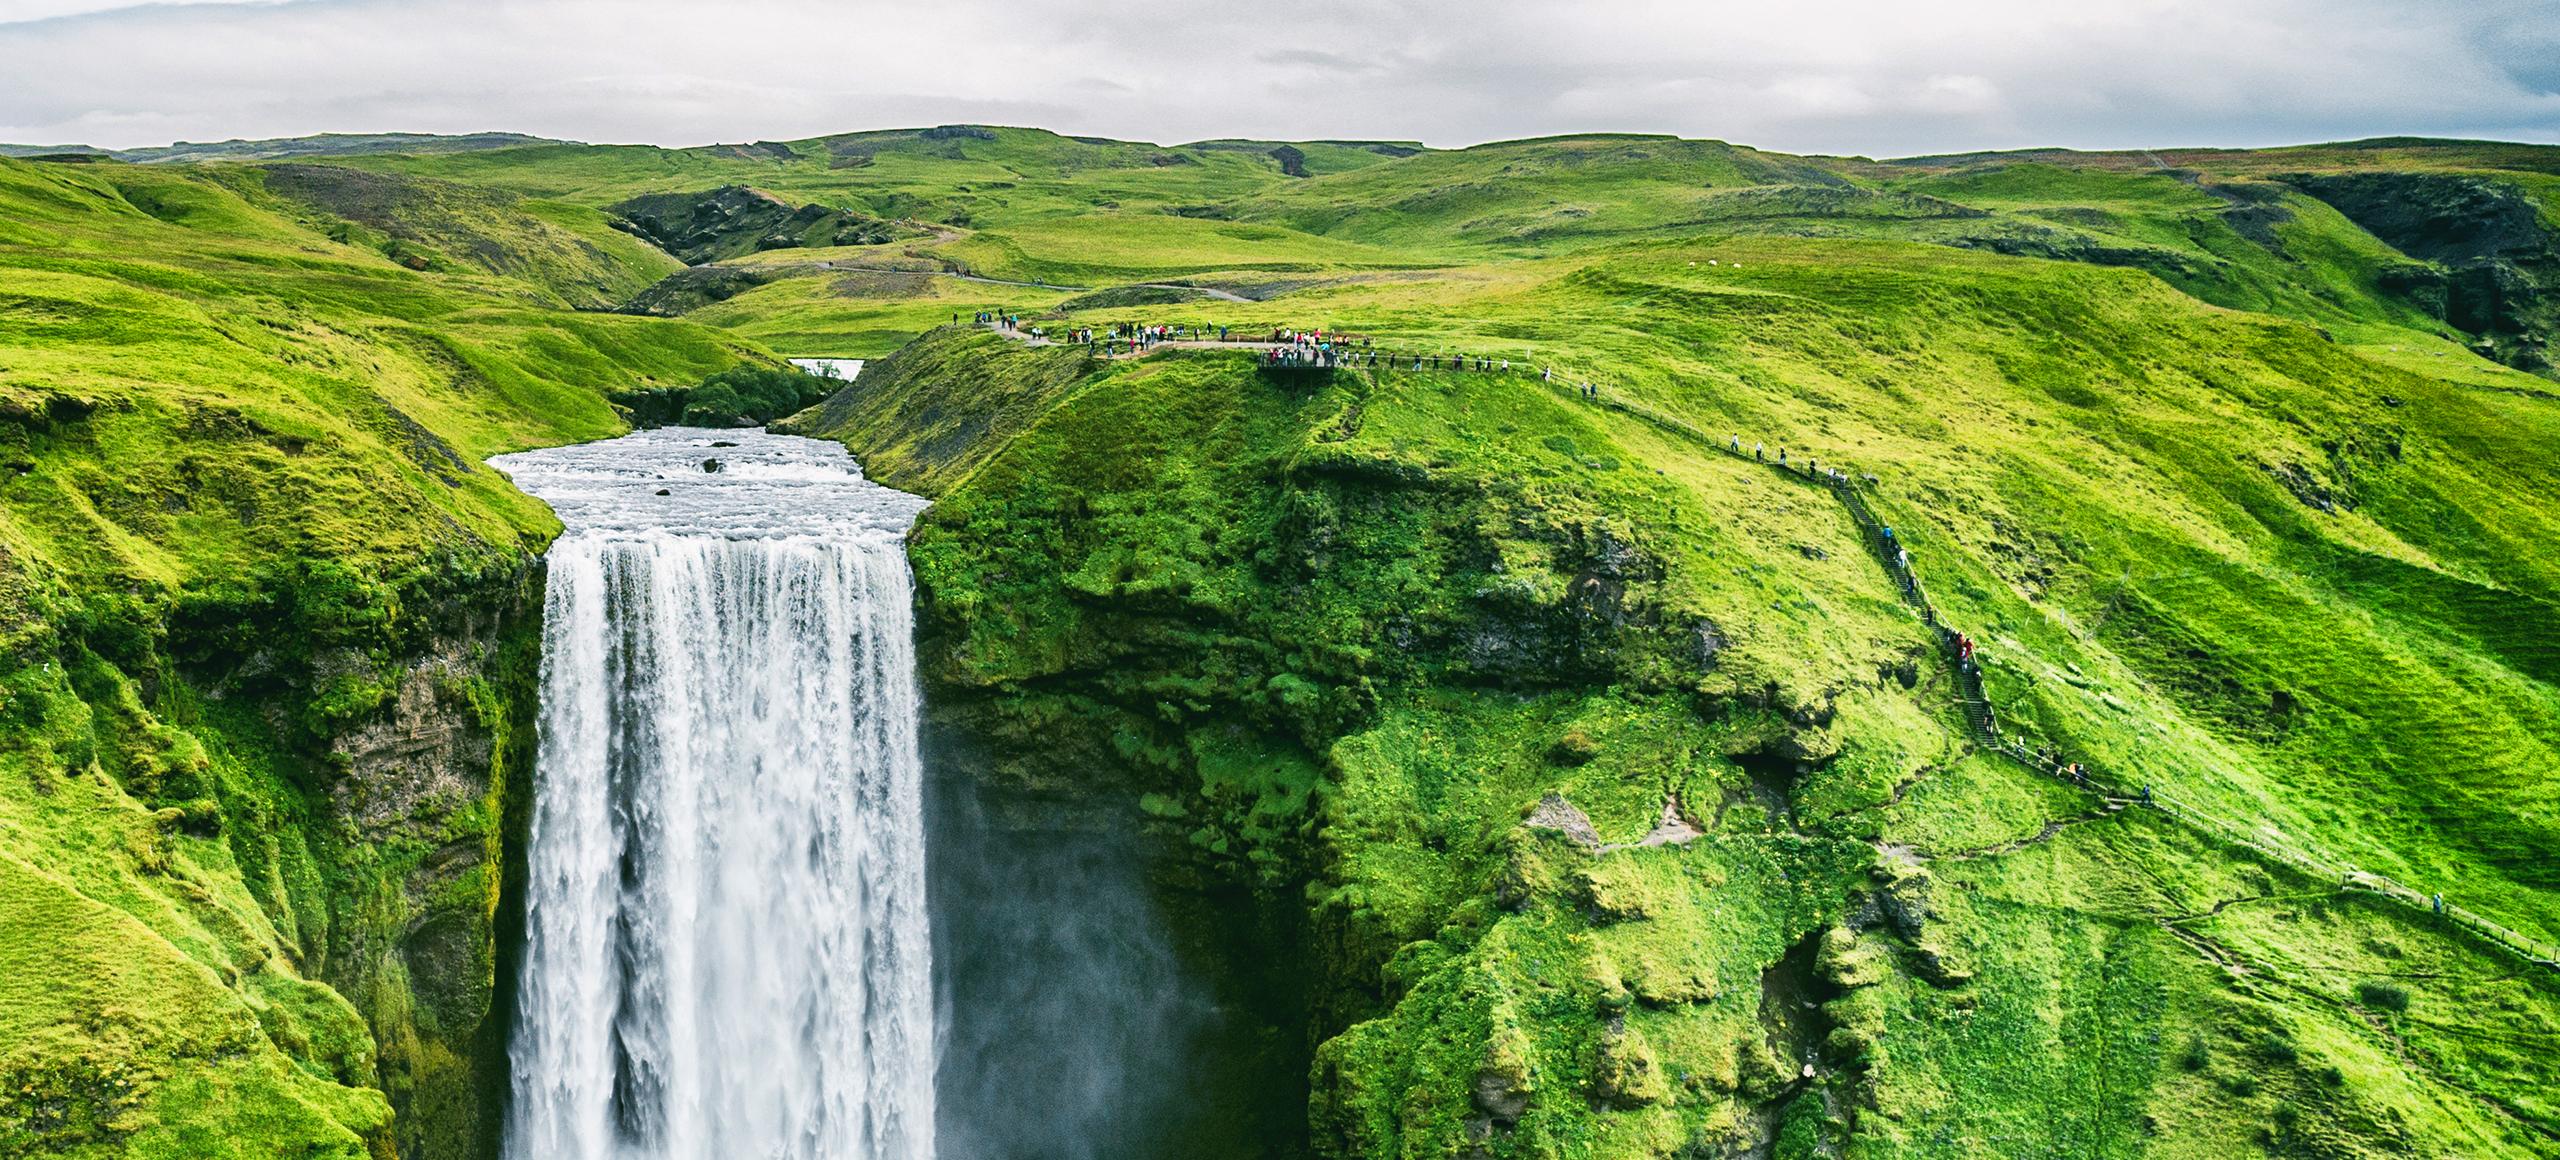 Green landscape with waterfall